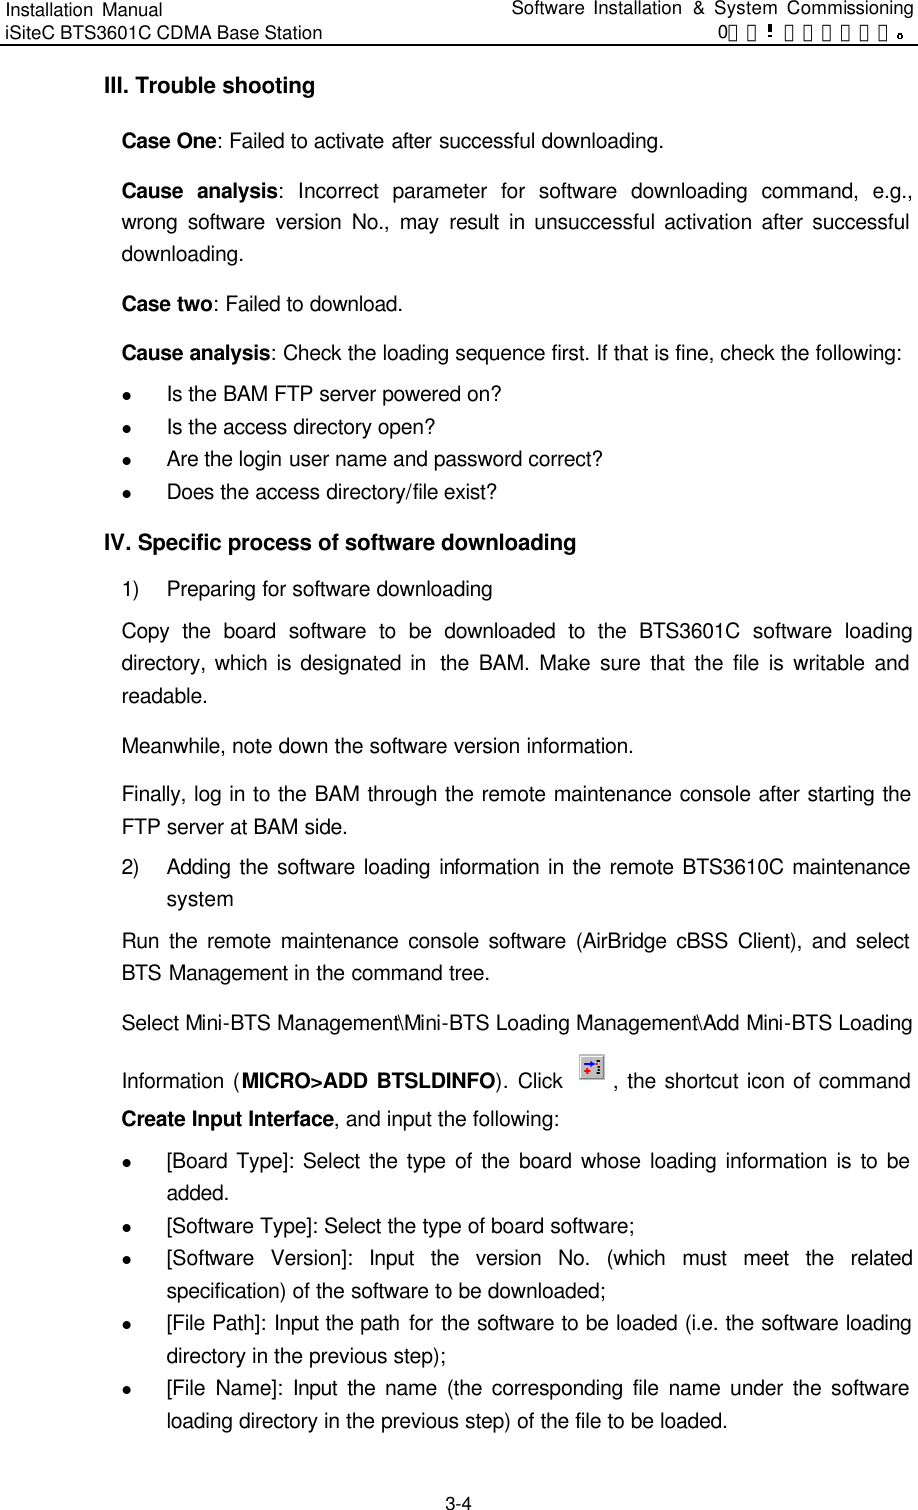 Installation Manual   iSiteC BTS3601C CDMA Base Station Software Installation &amp; System Commissioning 0错误 表格结果无效  3-4 III. Trouble shooting Case One: Failed to activate after successful downloading.  Cause analysis: Incorrect parameter for software downloading command, e.g., wrong software version No., may result in unsuccessful activation after successful downloading.   Case two: Failed to download. Cause analysis: Check the loading sequence first. If that is fine, check the following:   l Is the BAM FTP server powered on? l Is the access directory open?   l Are the login user name and password correct?   l Does the access directory/file exist?   IV. Specific process of software downloading 1) Preparing for software downloading Copy the board software to be downloaded to the BTS3601C software loading directory, which is designated in  the BAM. Make sure that the file is writable and readable.   Meanwhile, note down the software version information.   Finally, log in to the BAM through the remote maintenance console after starting the FTP server at BAM side.   2) Adding the software loading information in the remote BTS3610C maintenance system Run the remote maintenance console software (AirBridge cBSS Client), and select BTS Management in the command tree.   Select Mini-BTS Management\Mini-BTS Loading Management\Add Mini-BTS Loading Information (MICRO&gt;ADD BTSLDINFO). Click  , the shortcut icon of command Create Input Interface, and input the following:   l [Board Type]: Select the type of the board whose loading information is to be added.   l [Software Type]: Select the type of board software;   l [Software Version]: Input the version No. (which must meet the related specification) of the software to be downloaded;   l [File Path]: Input the path for the software to be loaded (i.e. the software loading directory in the previous step);   l [File Name]: Input the name (the corresponding file name under the software loading directory in the previous step) of the file to be loaded.   